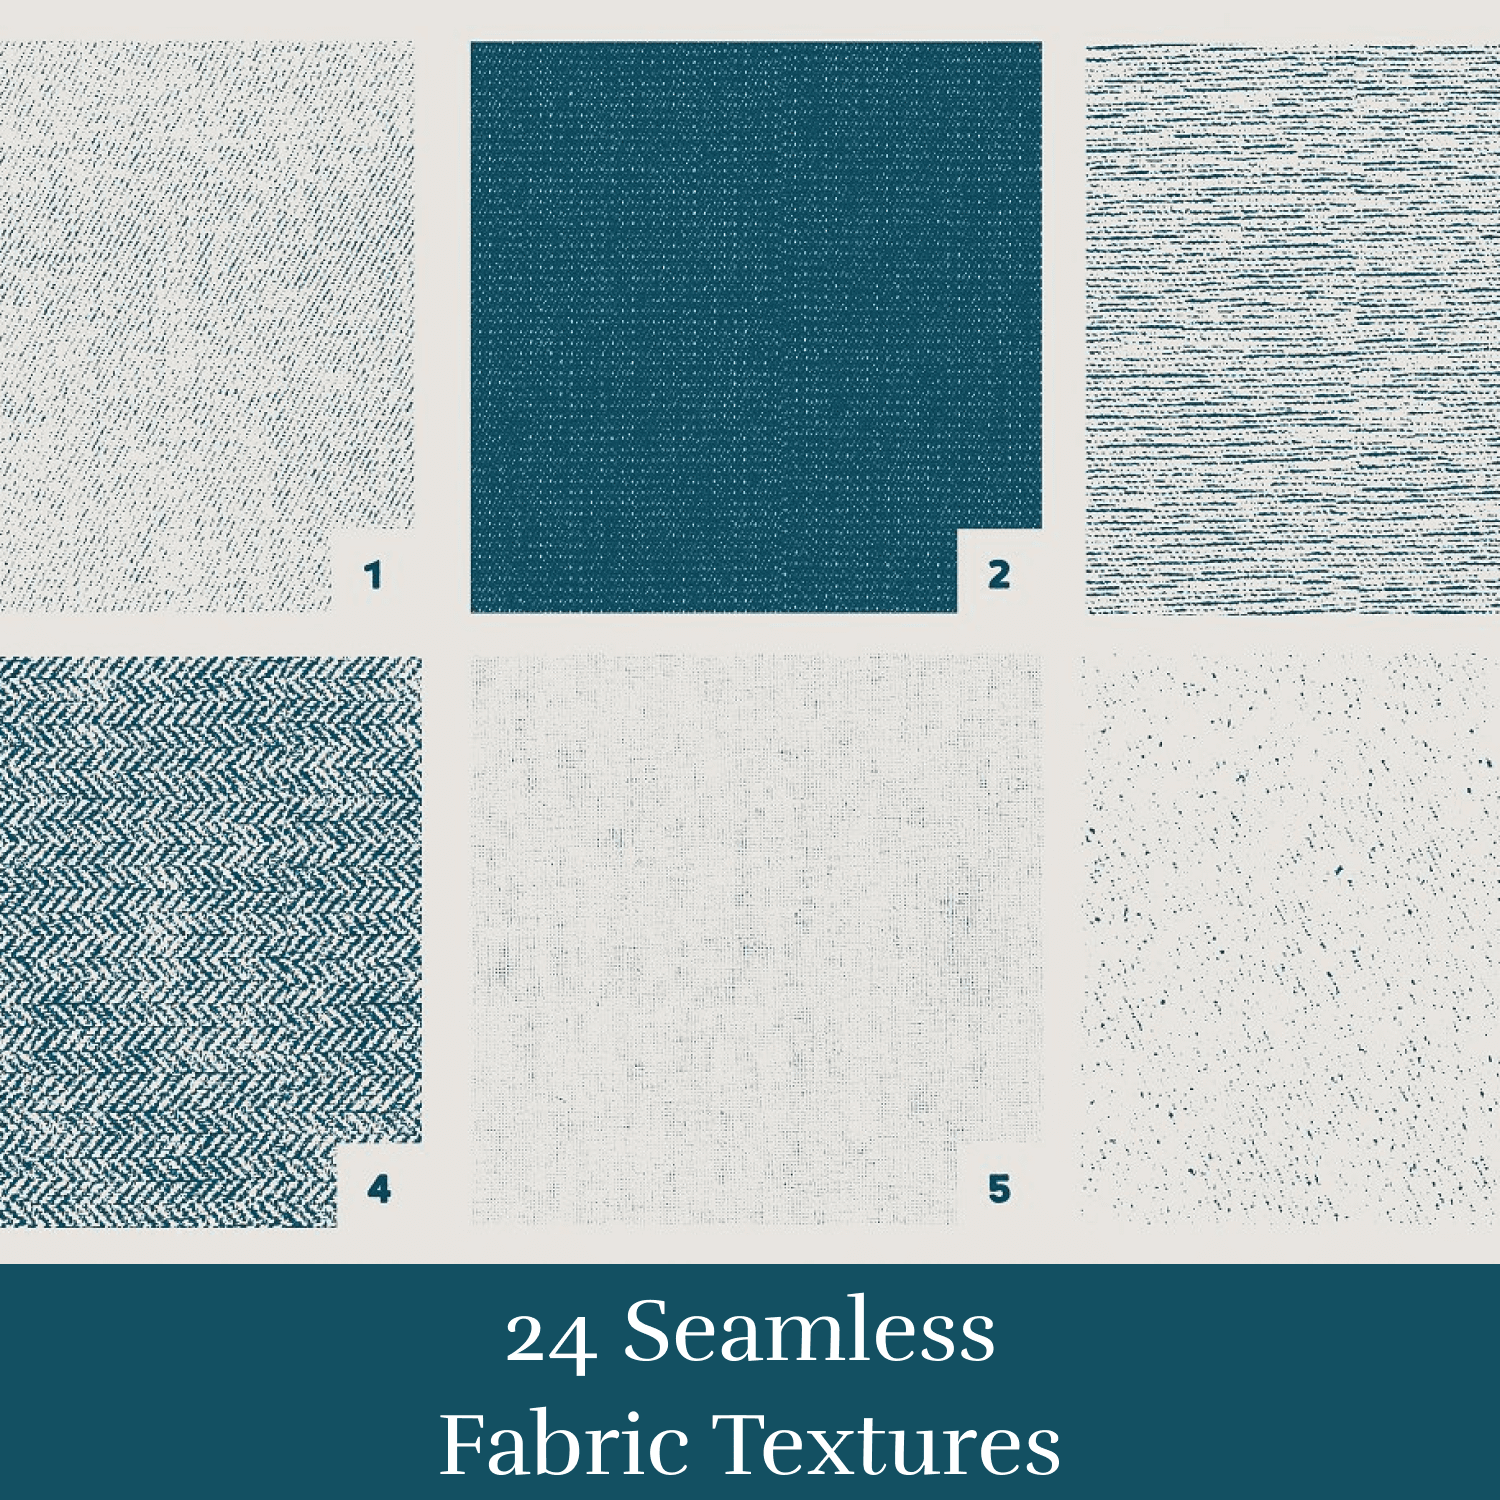 24 Seamless Fabric Textures cover.